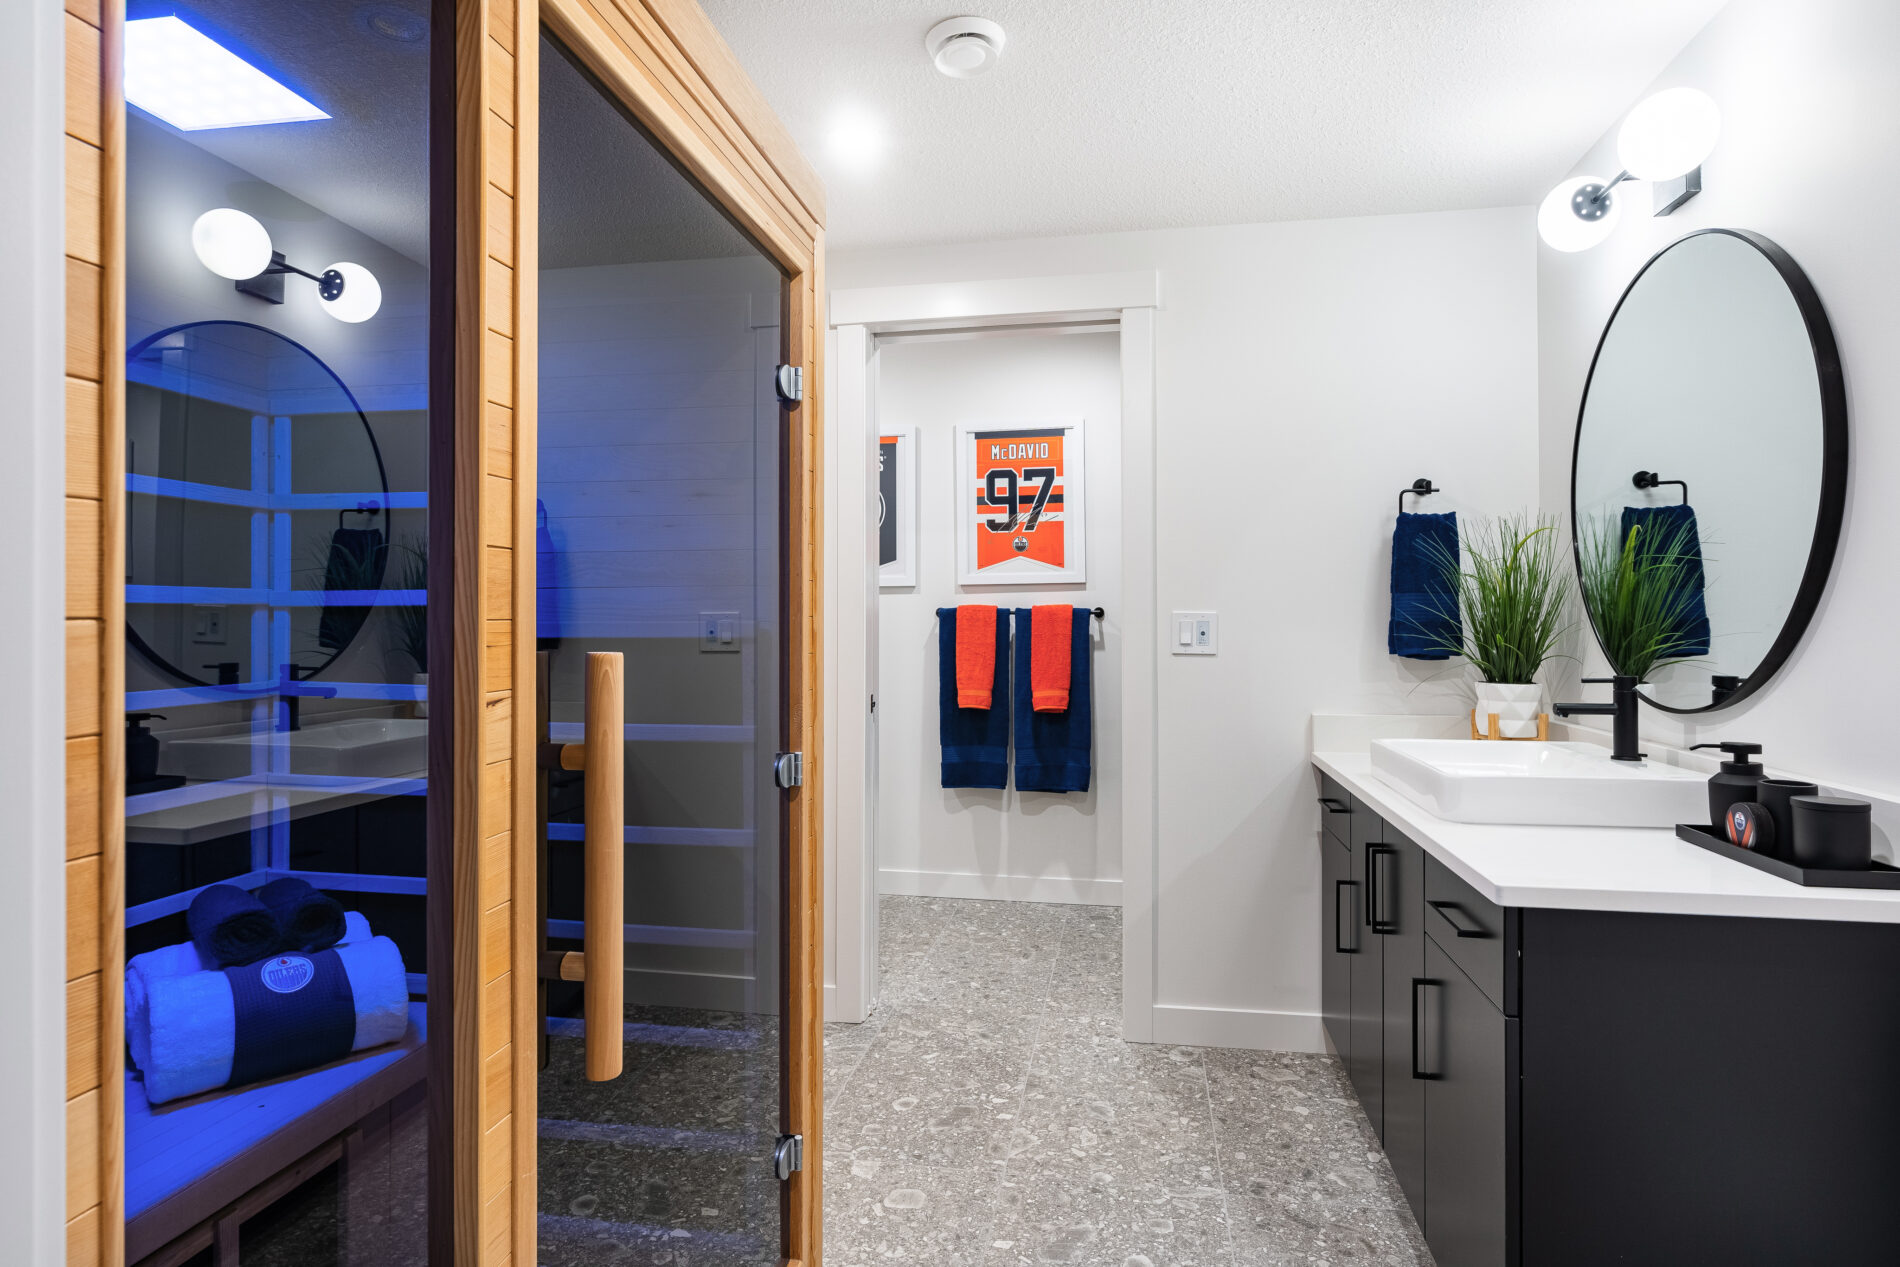 Bathroom of Oilers Fan Cave basement with large cedar sauna to the left, a sleek black vanity with round mirror above and looking through to the shower room with blue and orange towels hanging